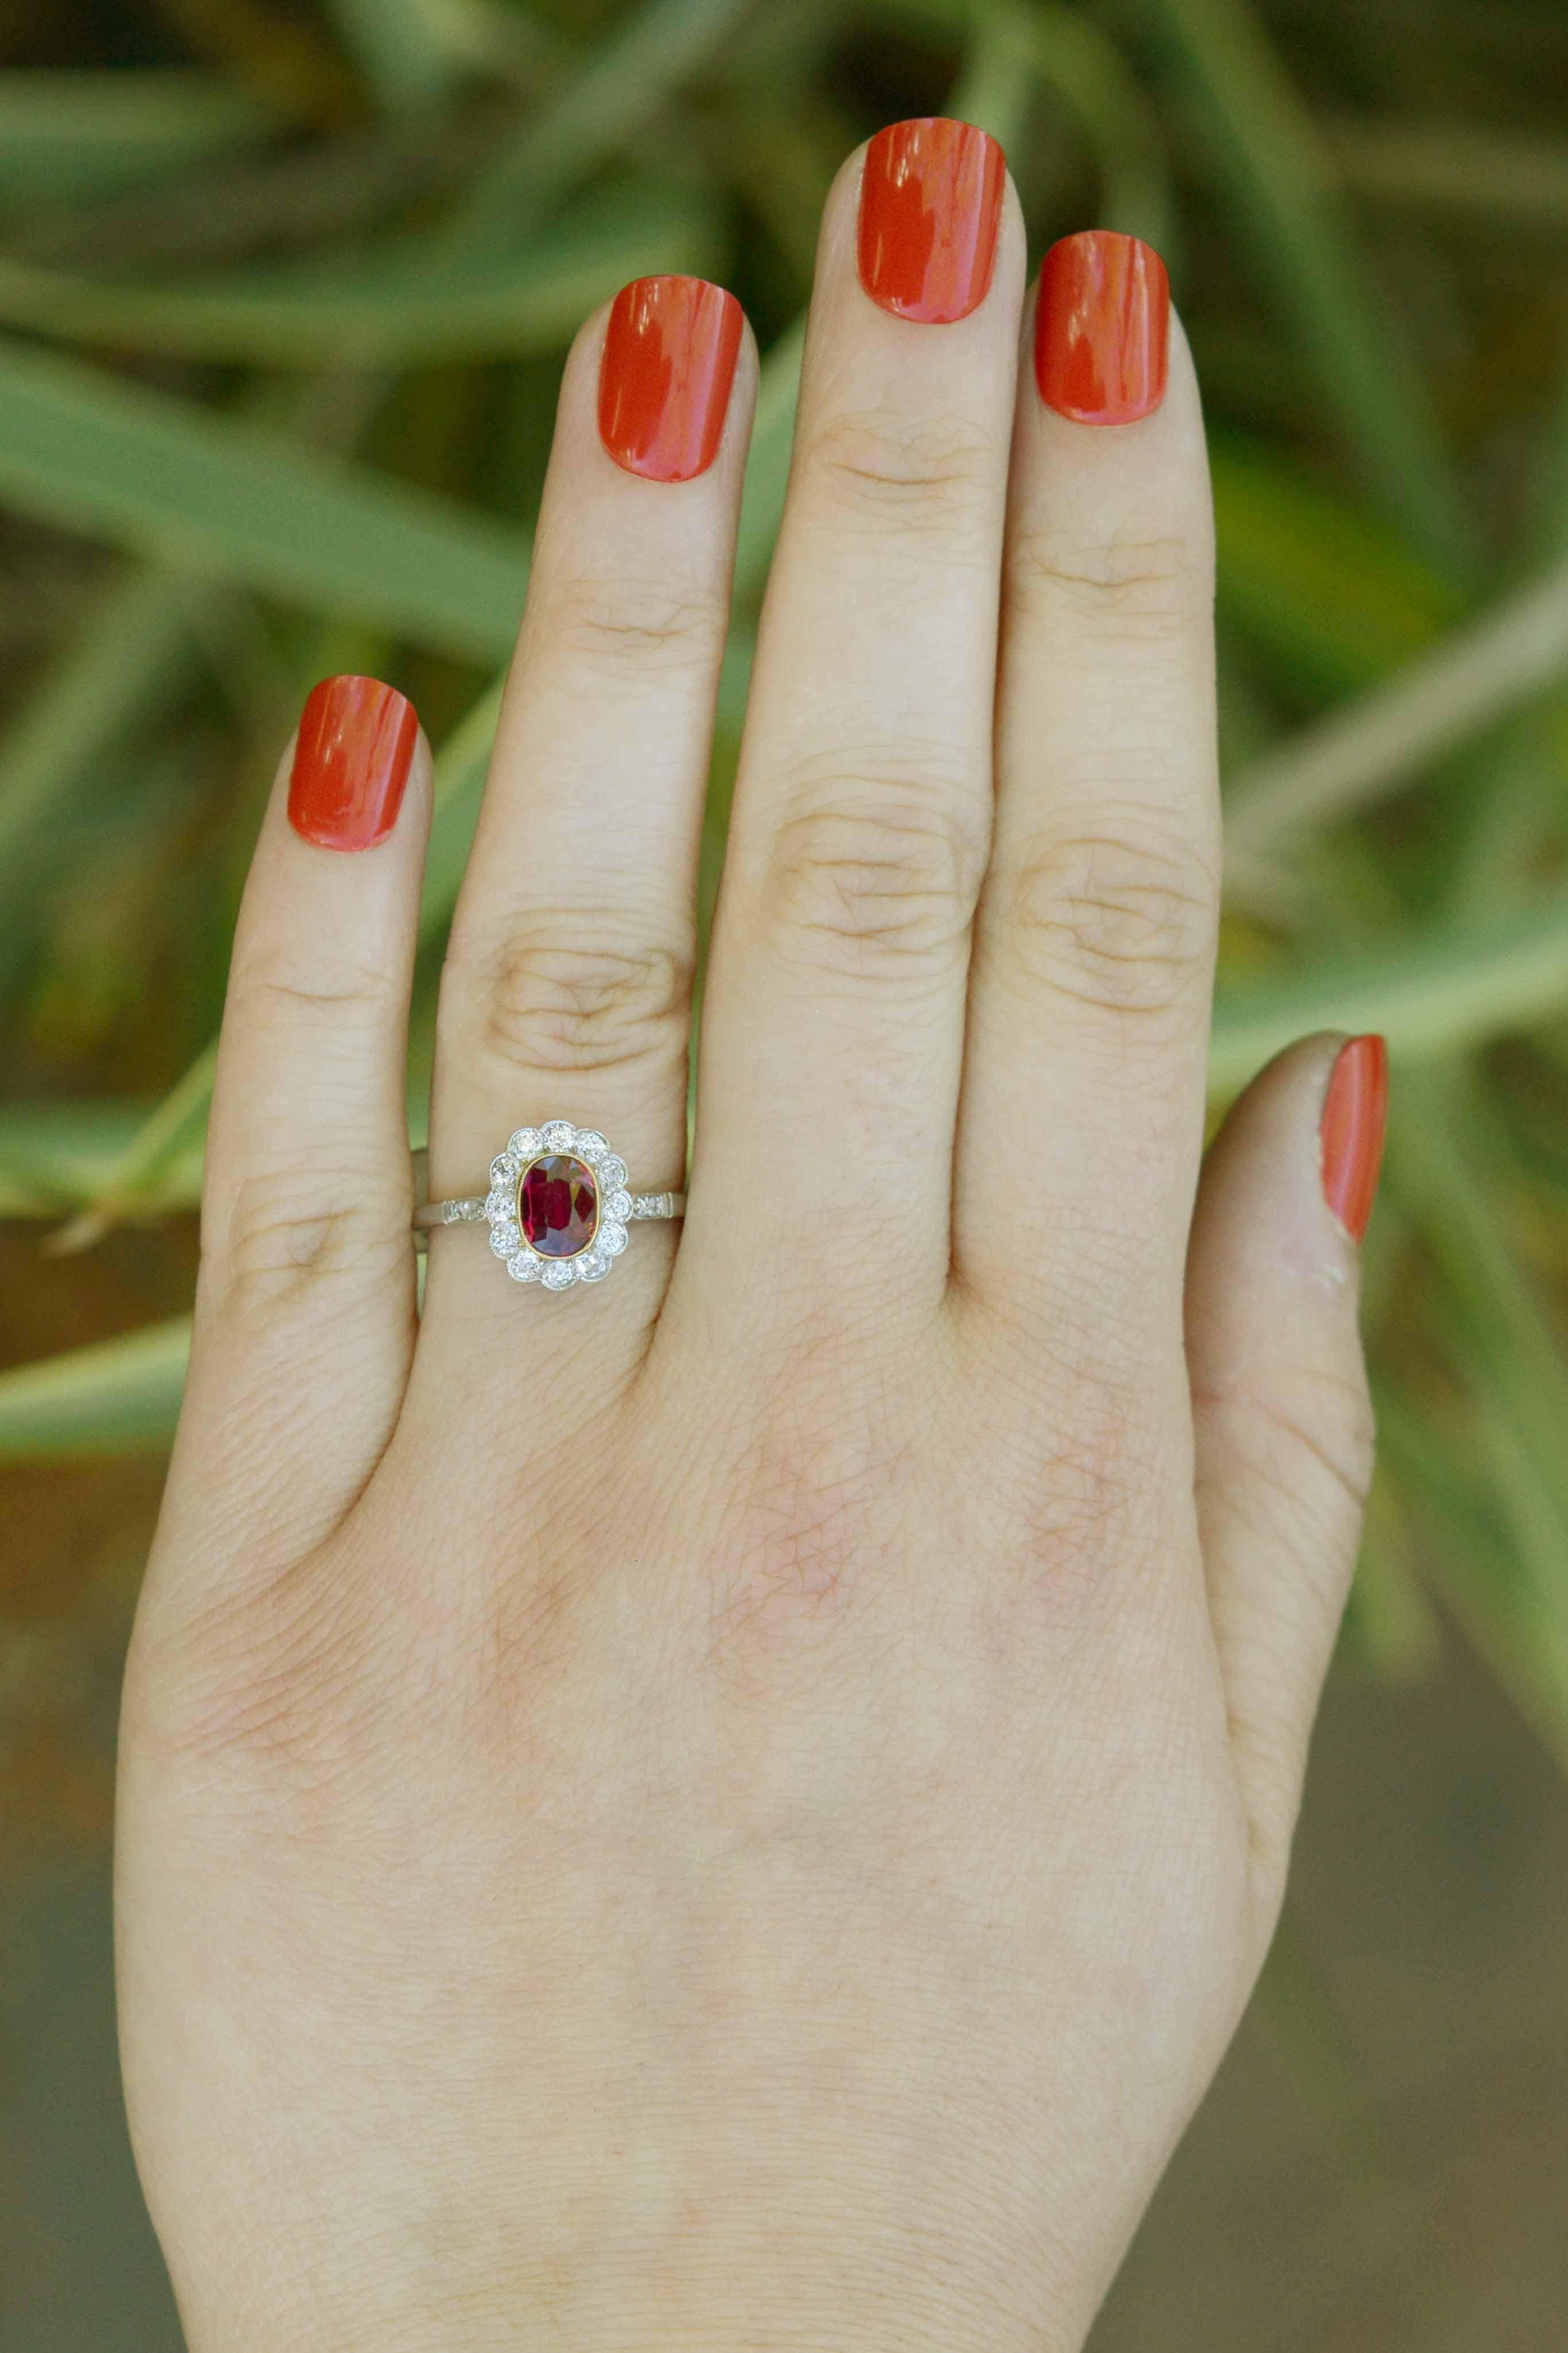 The DePalma antique ruby and diamond engagement ring is a classic Edwardian revival halo design. Lovingly restored from a circa 1900s bridal heirloom, the oval, 1 carat central ruby of a rich, pigeon blood red with a deeply saturated and lustrous